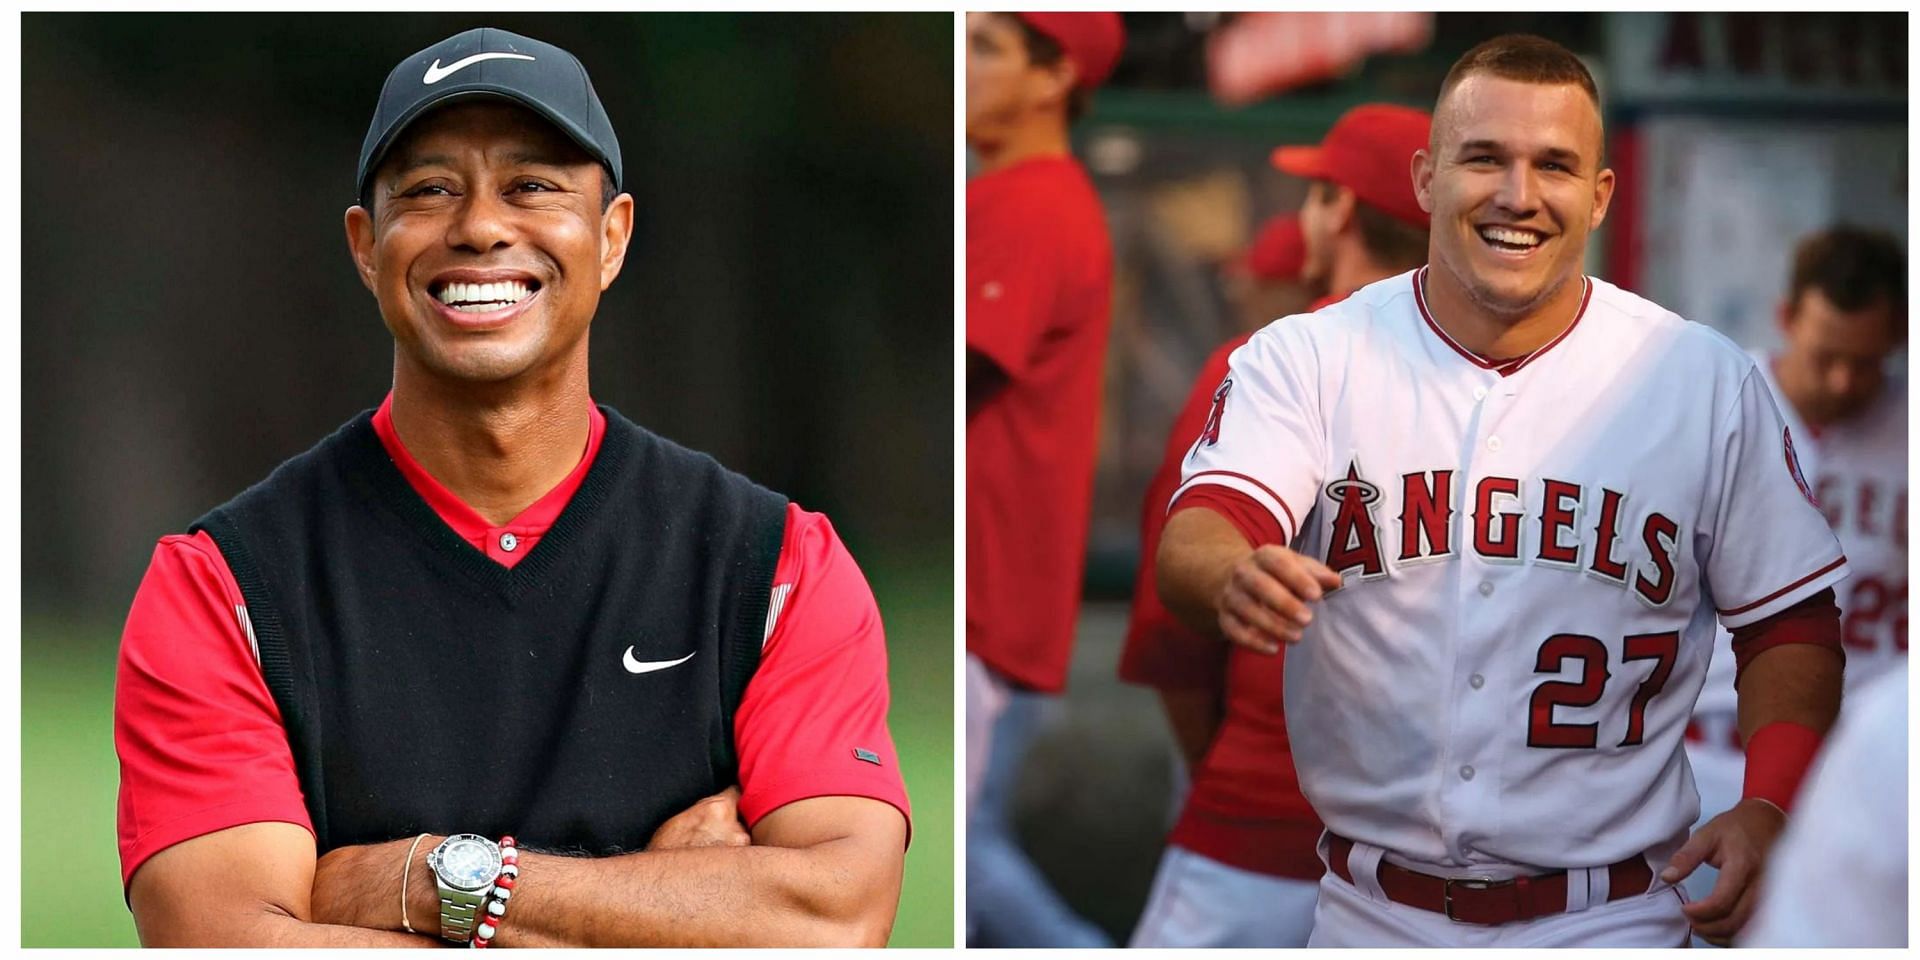 Tiger Woods and Mike Trout are partnering to build a new golf course &quot;Trout National&quot;